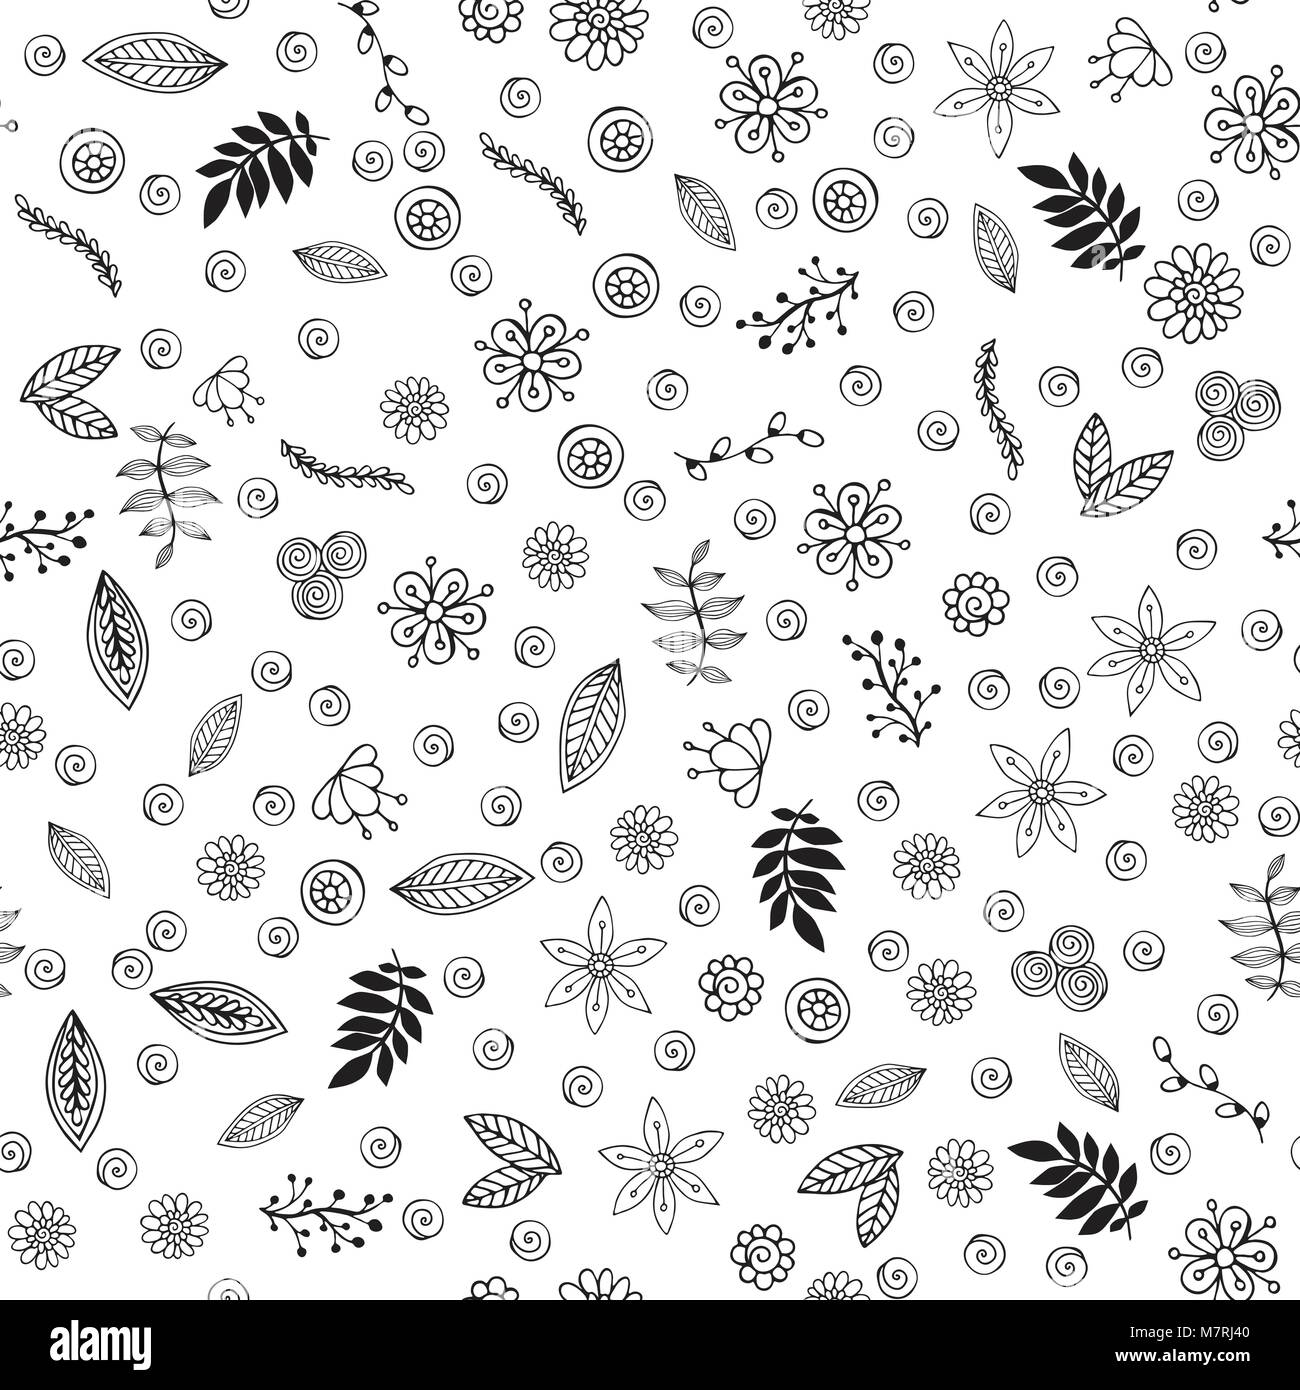 Spring Floral Print Wrapping Paper Pack 20 – Floral Supplies Store